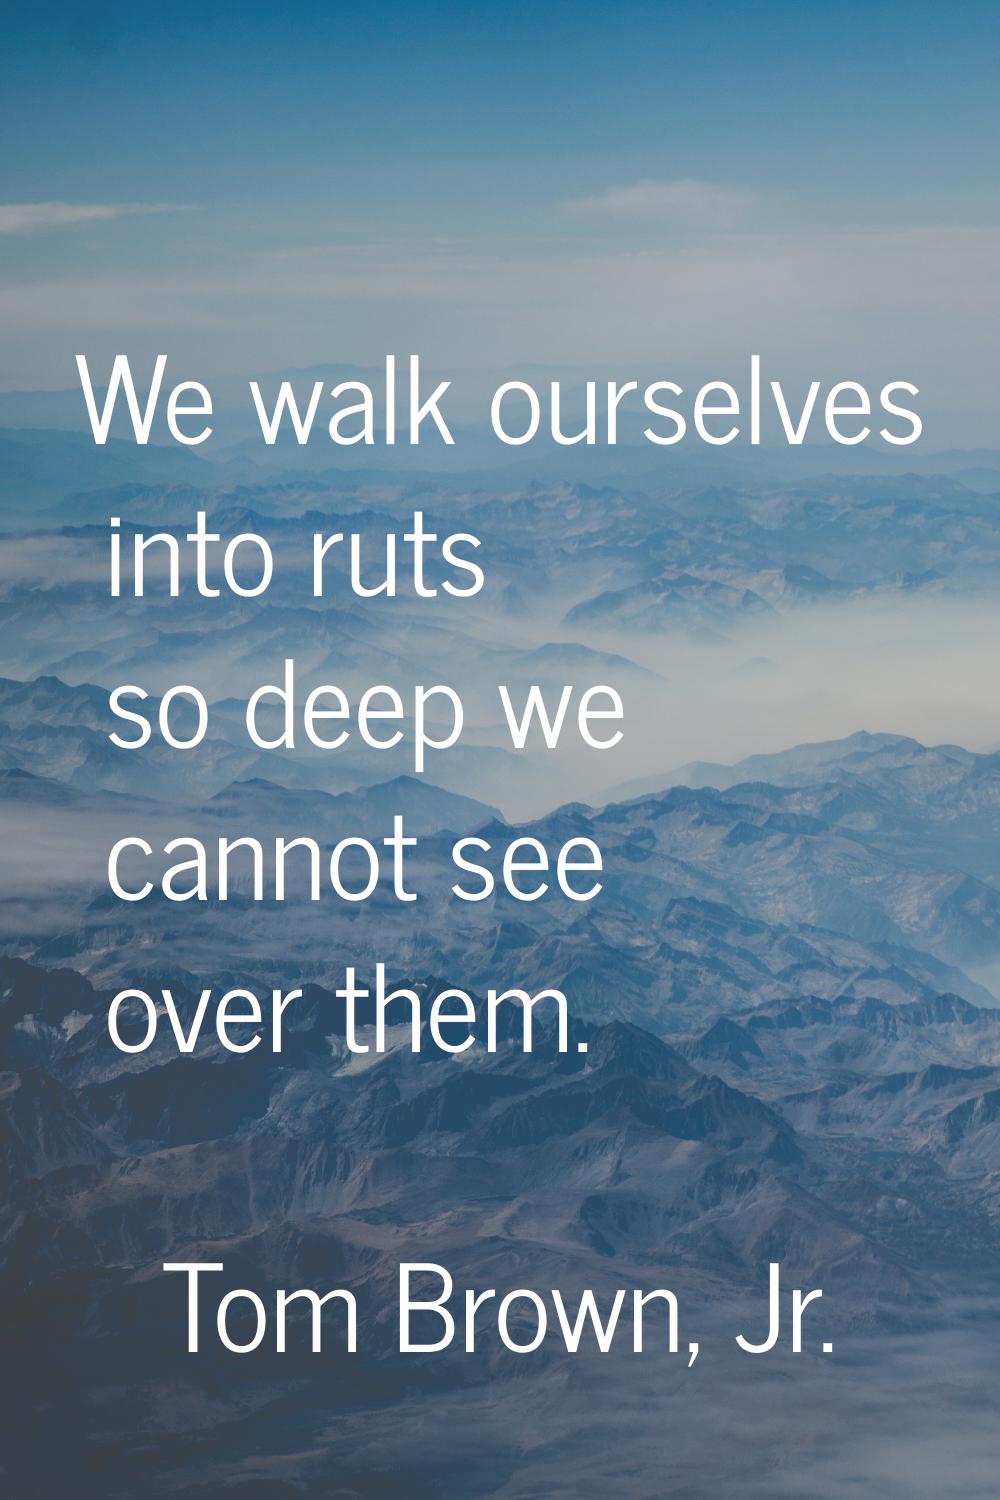 We walk ourselves into ruts so deep we cannot see over them.